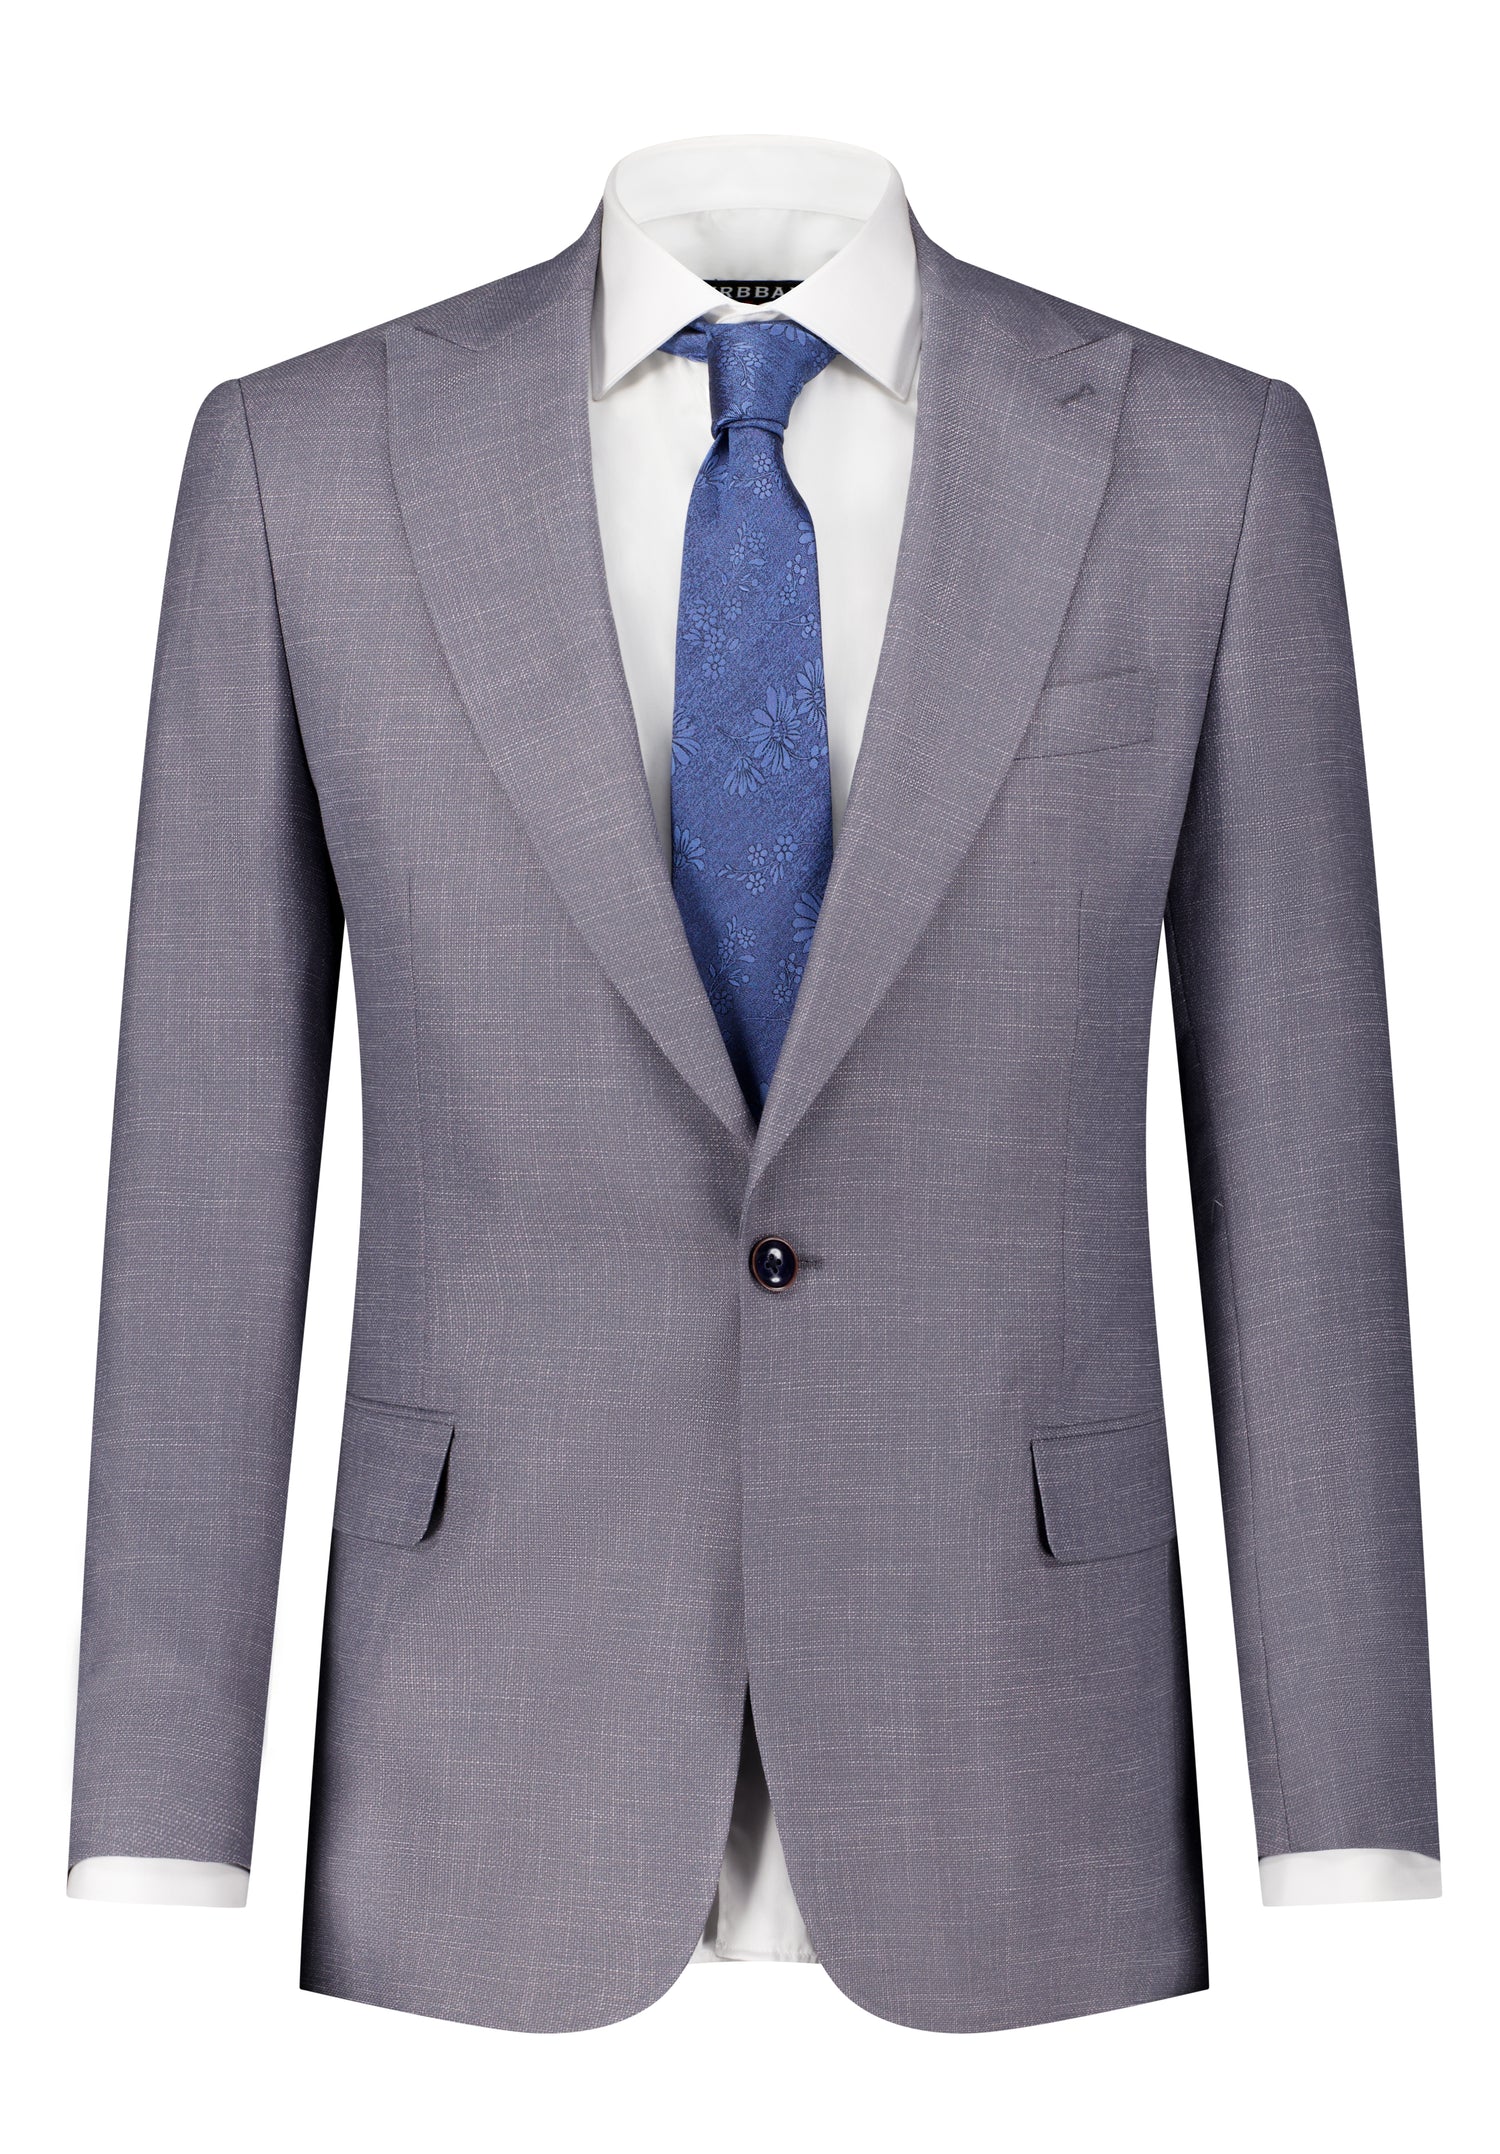 The Lenno Suit - Suit by Urbbana